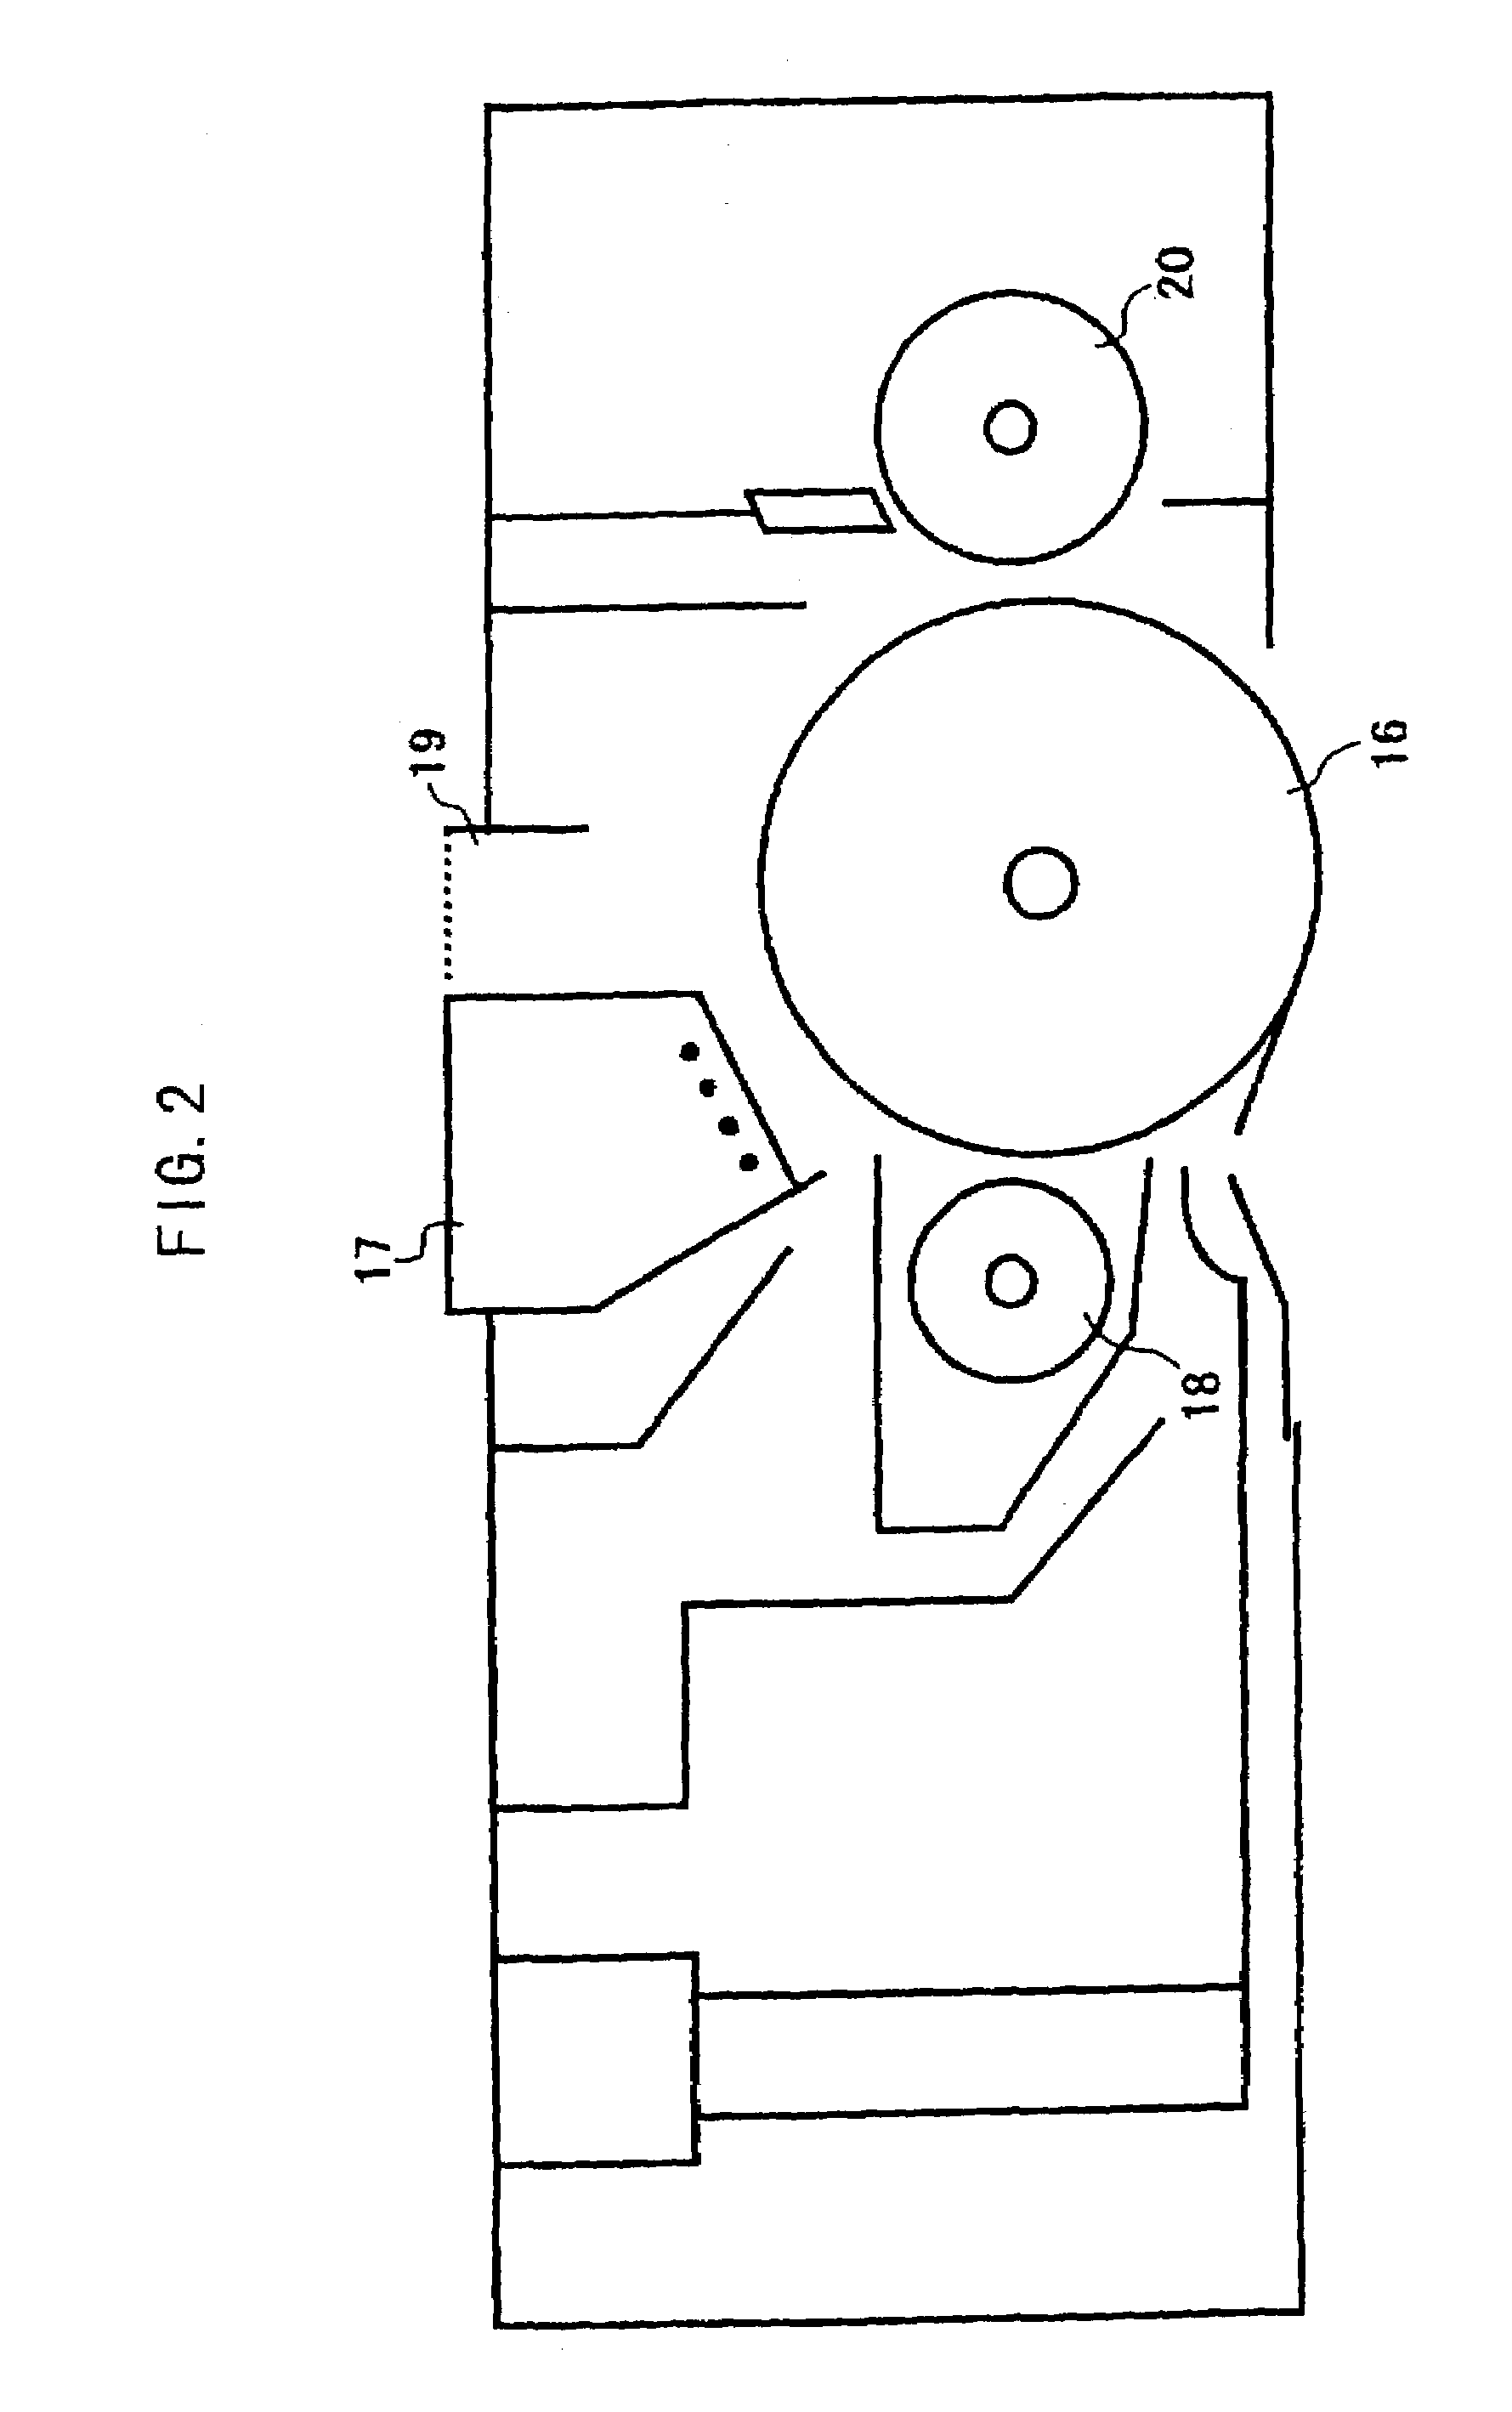 Electrophotographic photoconductor having a crosslinked resin layer and method of preparing an electrophotographic photoconductor